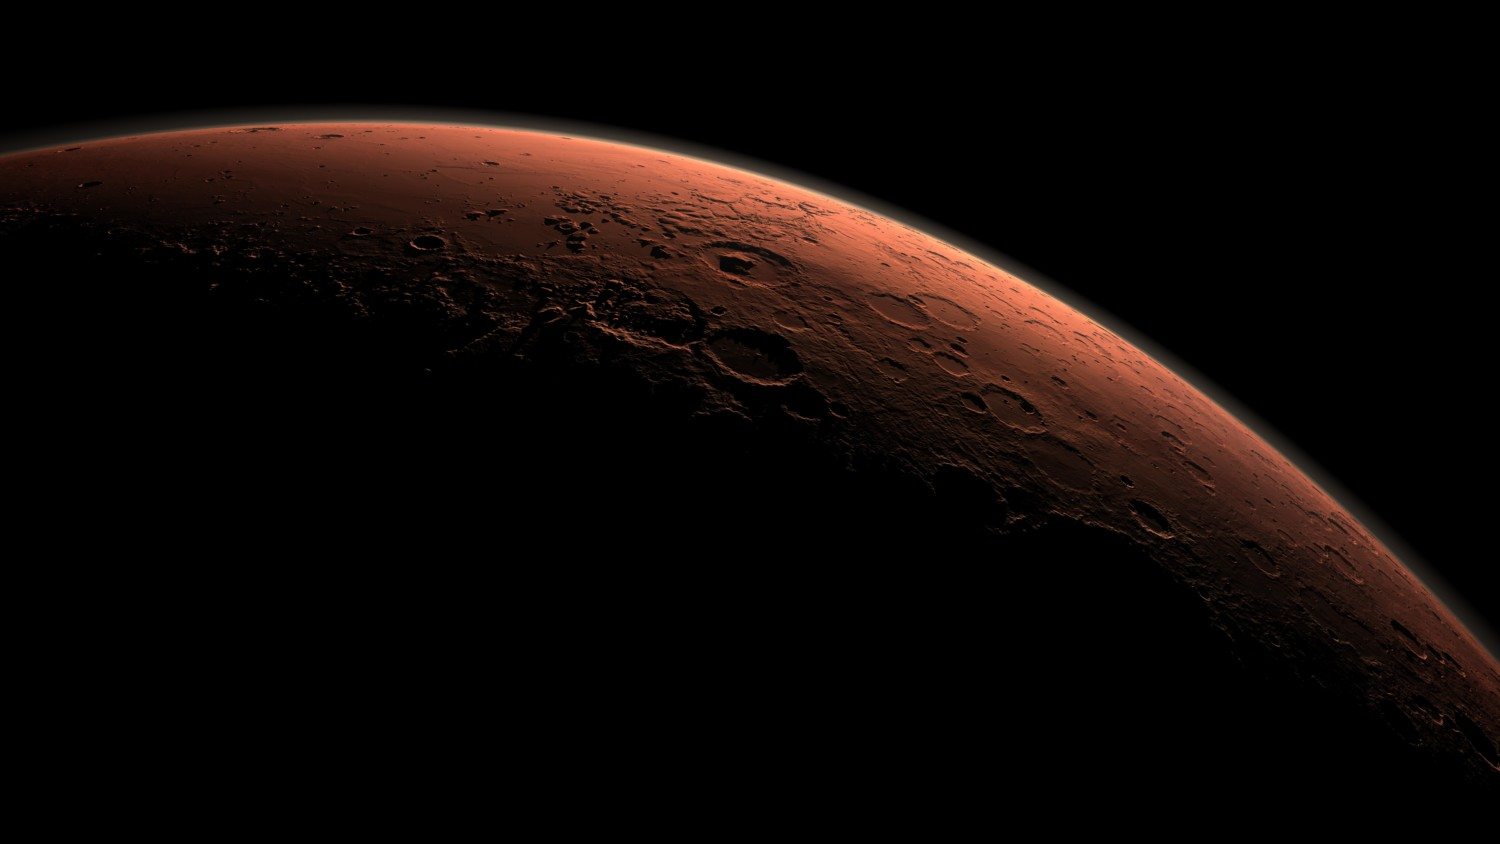 Daybreak at Gale Crater